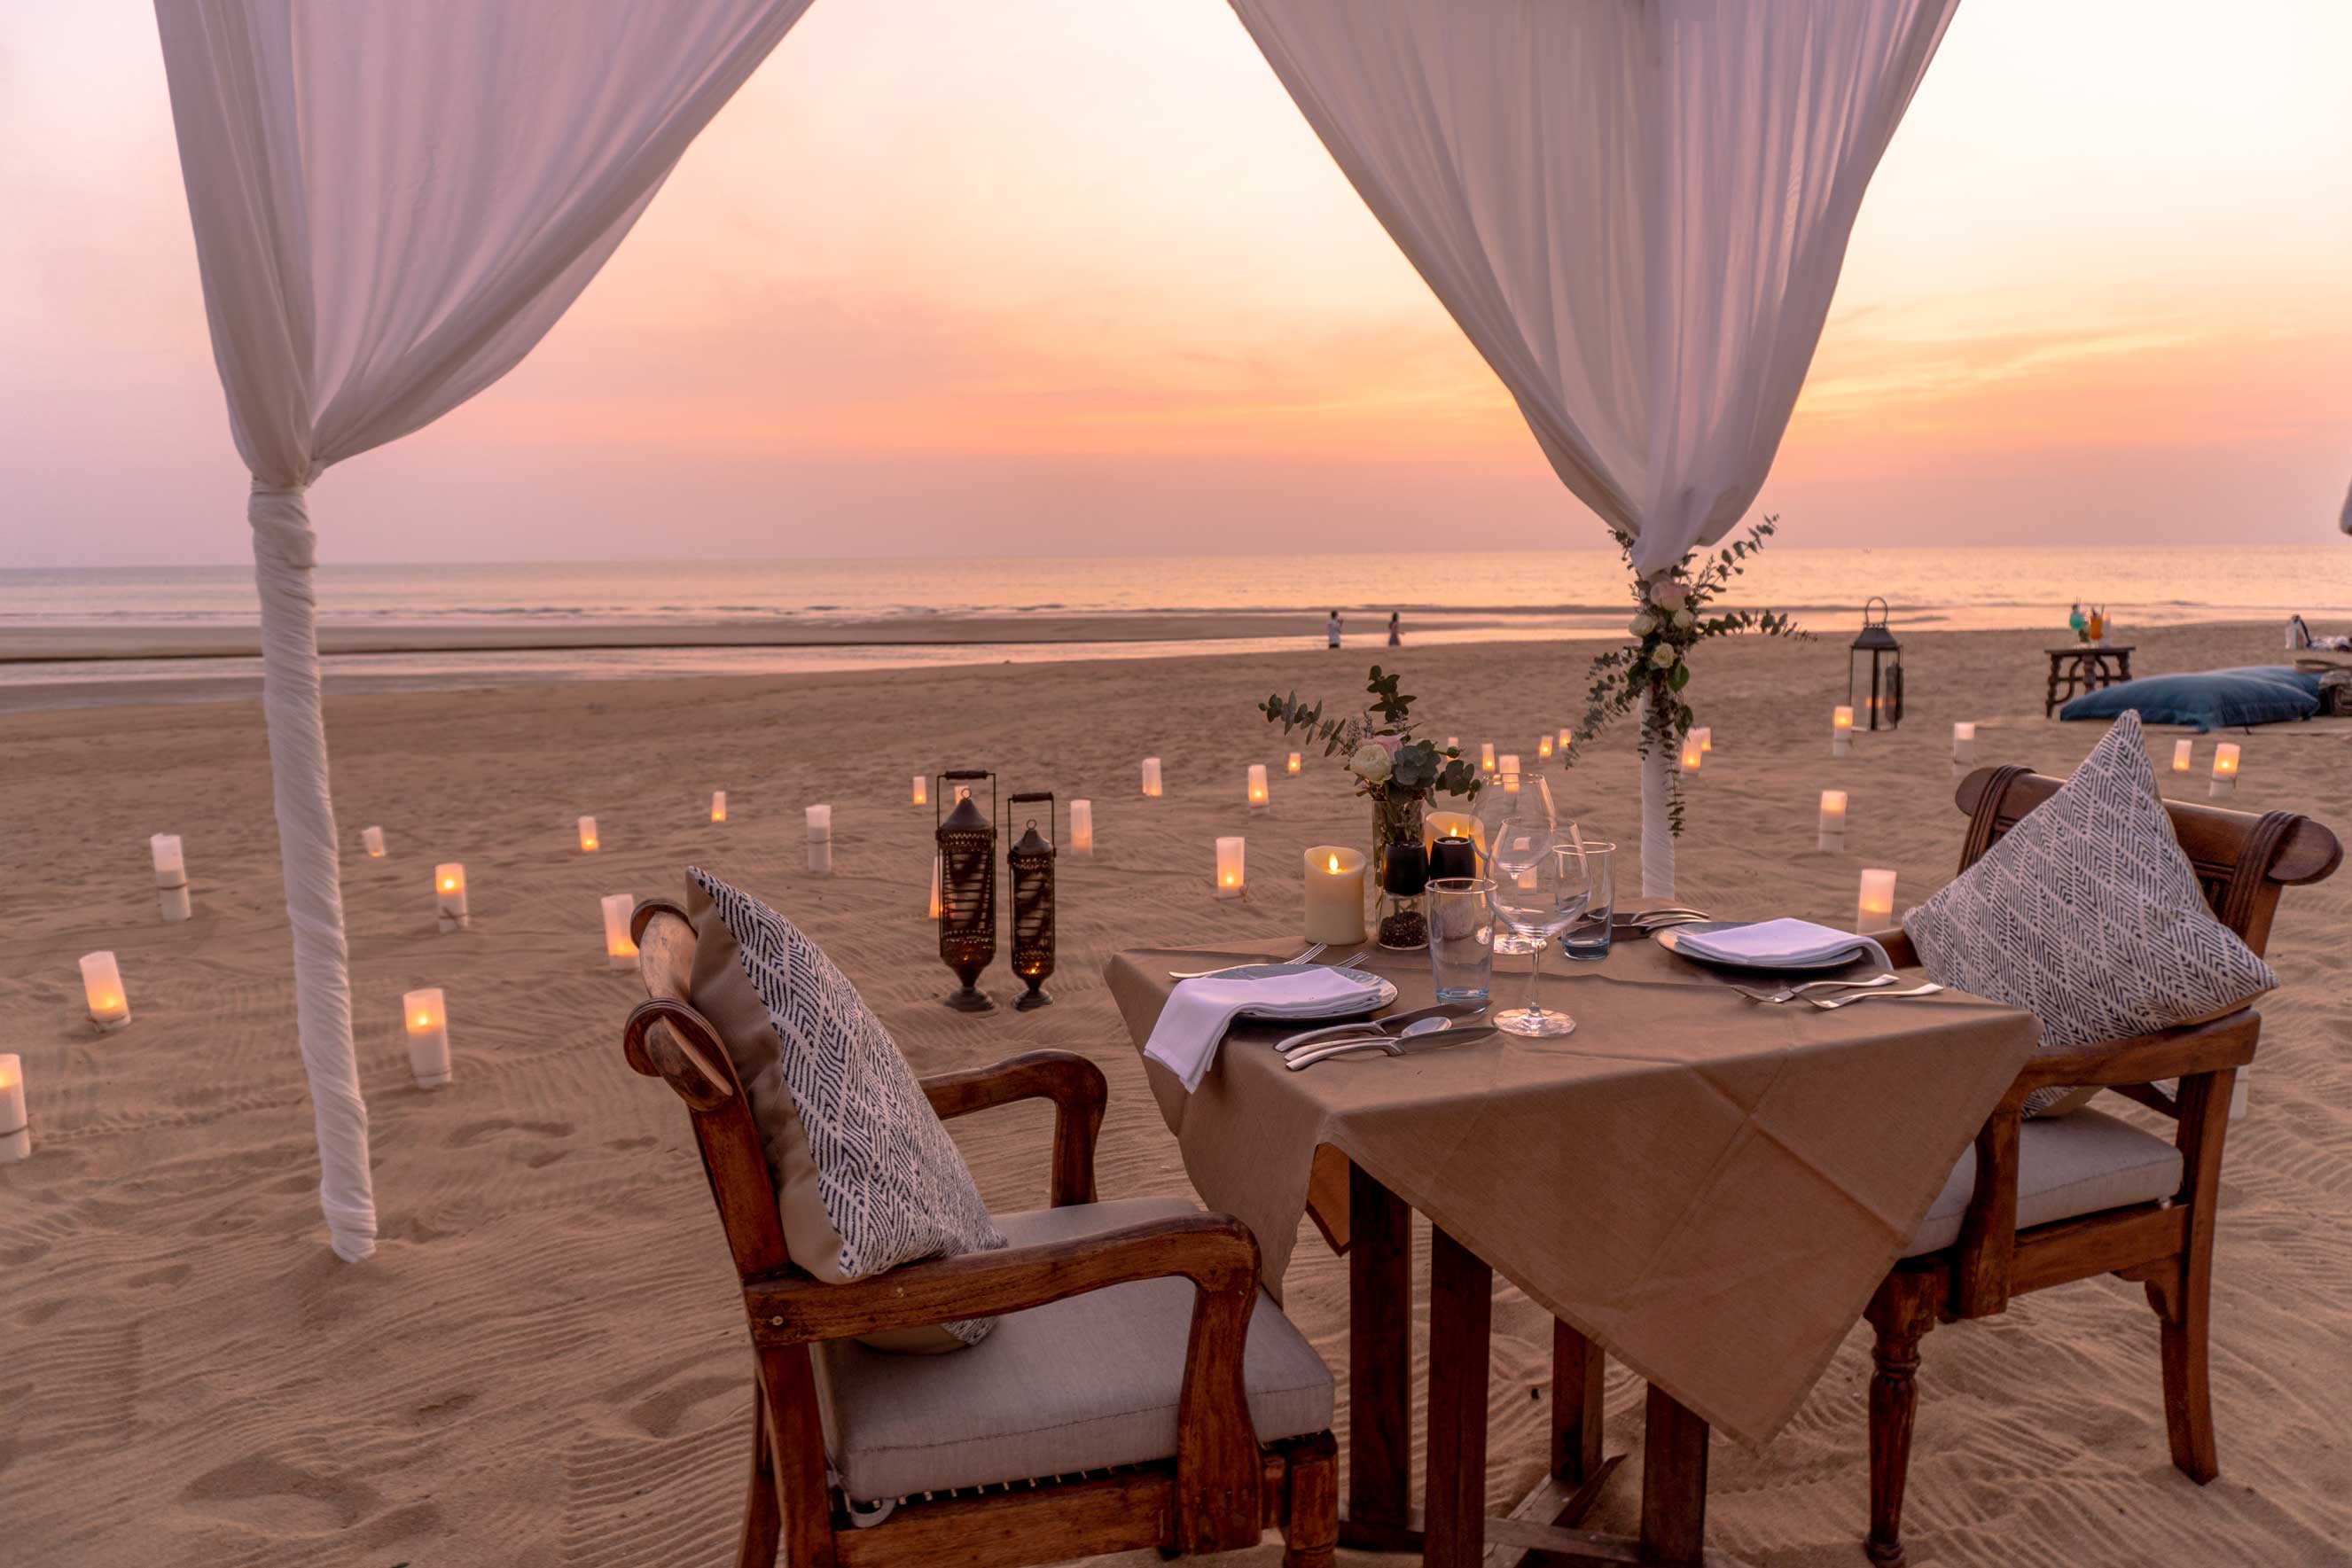 Romantic private dinner dinning on the beach with sunset view